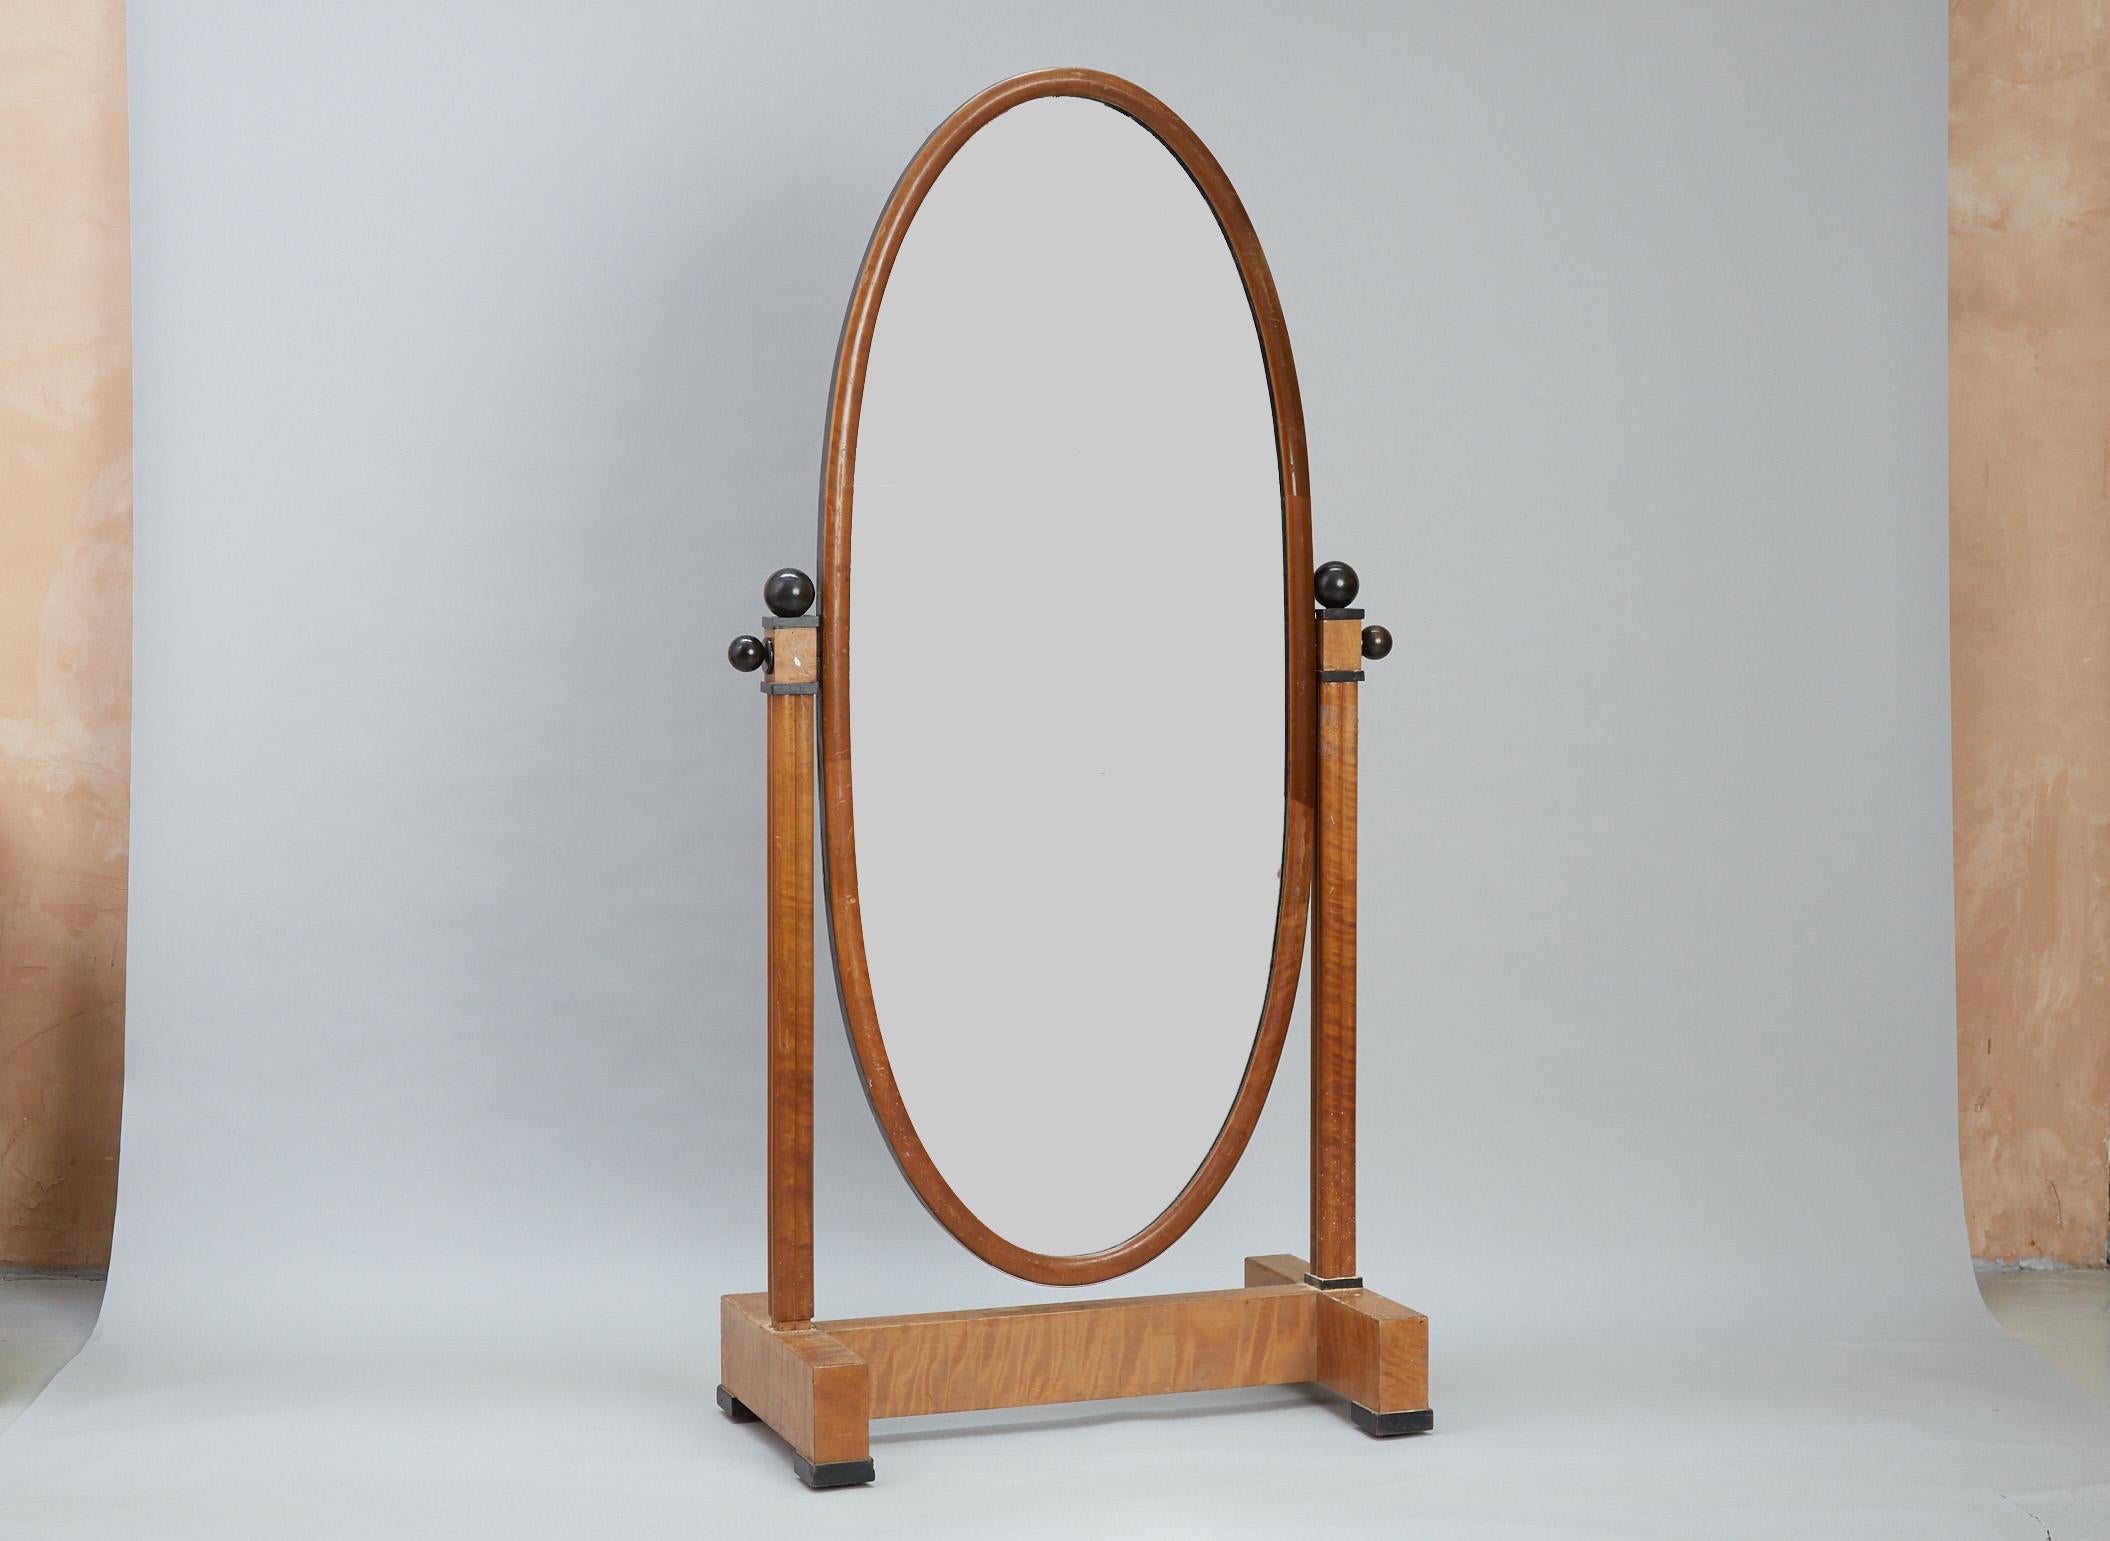 A fabulous Art deco cheval floor mirror. 
Some losses to the trim but still a very stylish piece.

The large oval mirror can be adjusted in both directions and is hung from two large fasteners on each side of the stand. 

The mirror is adorned with